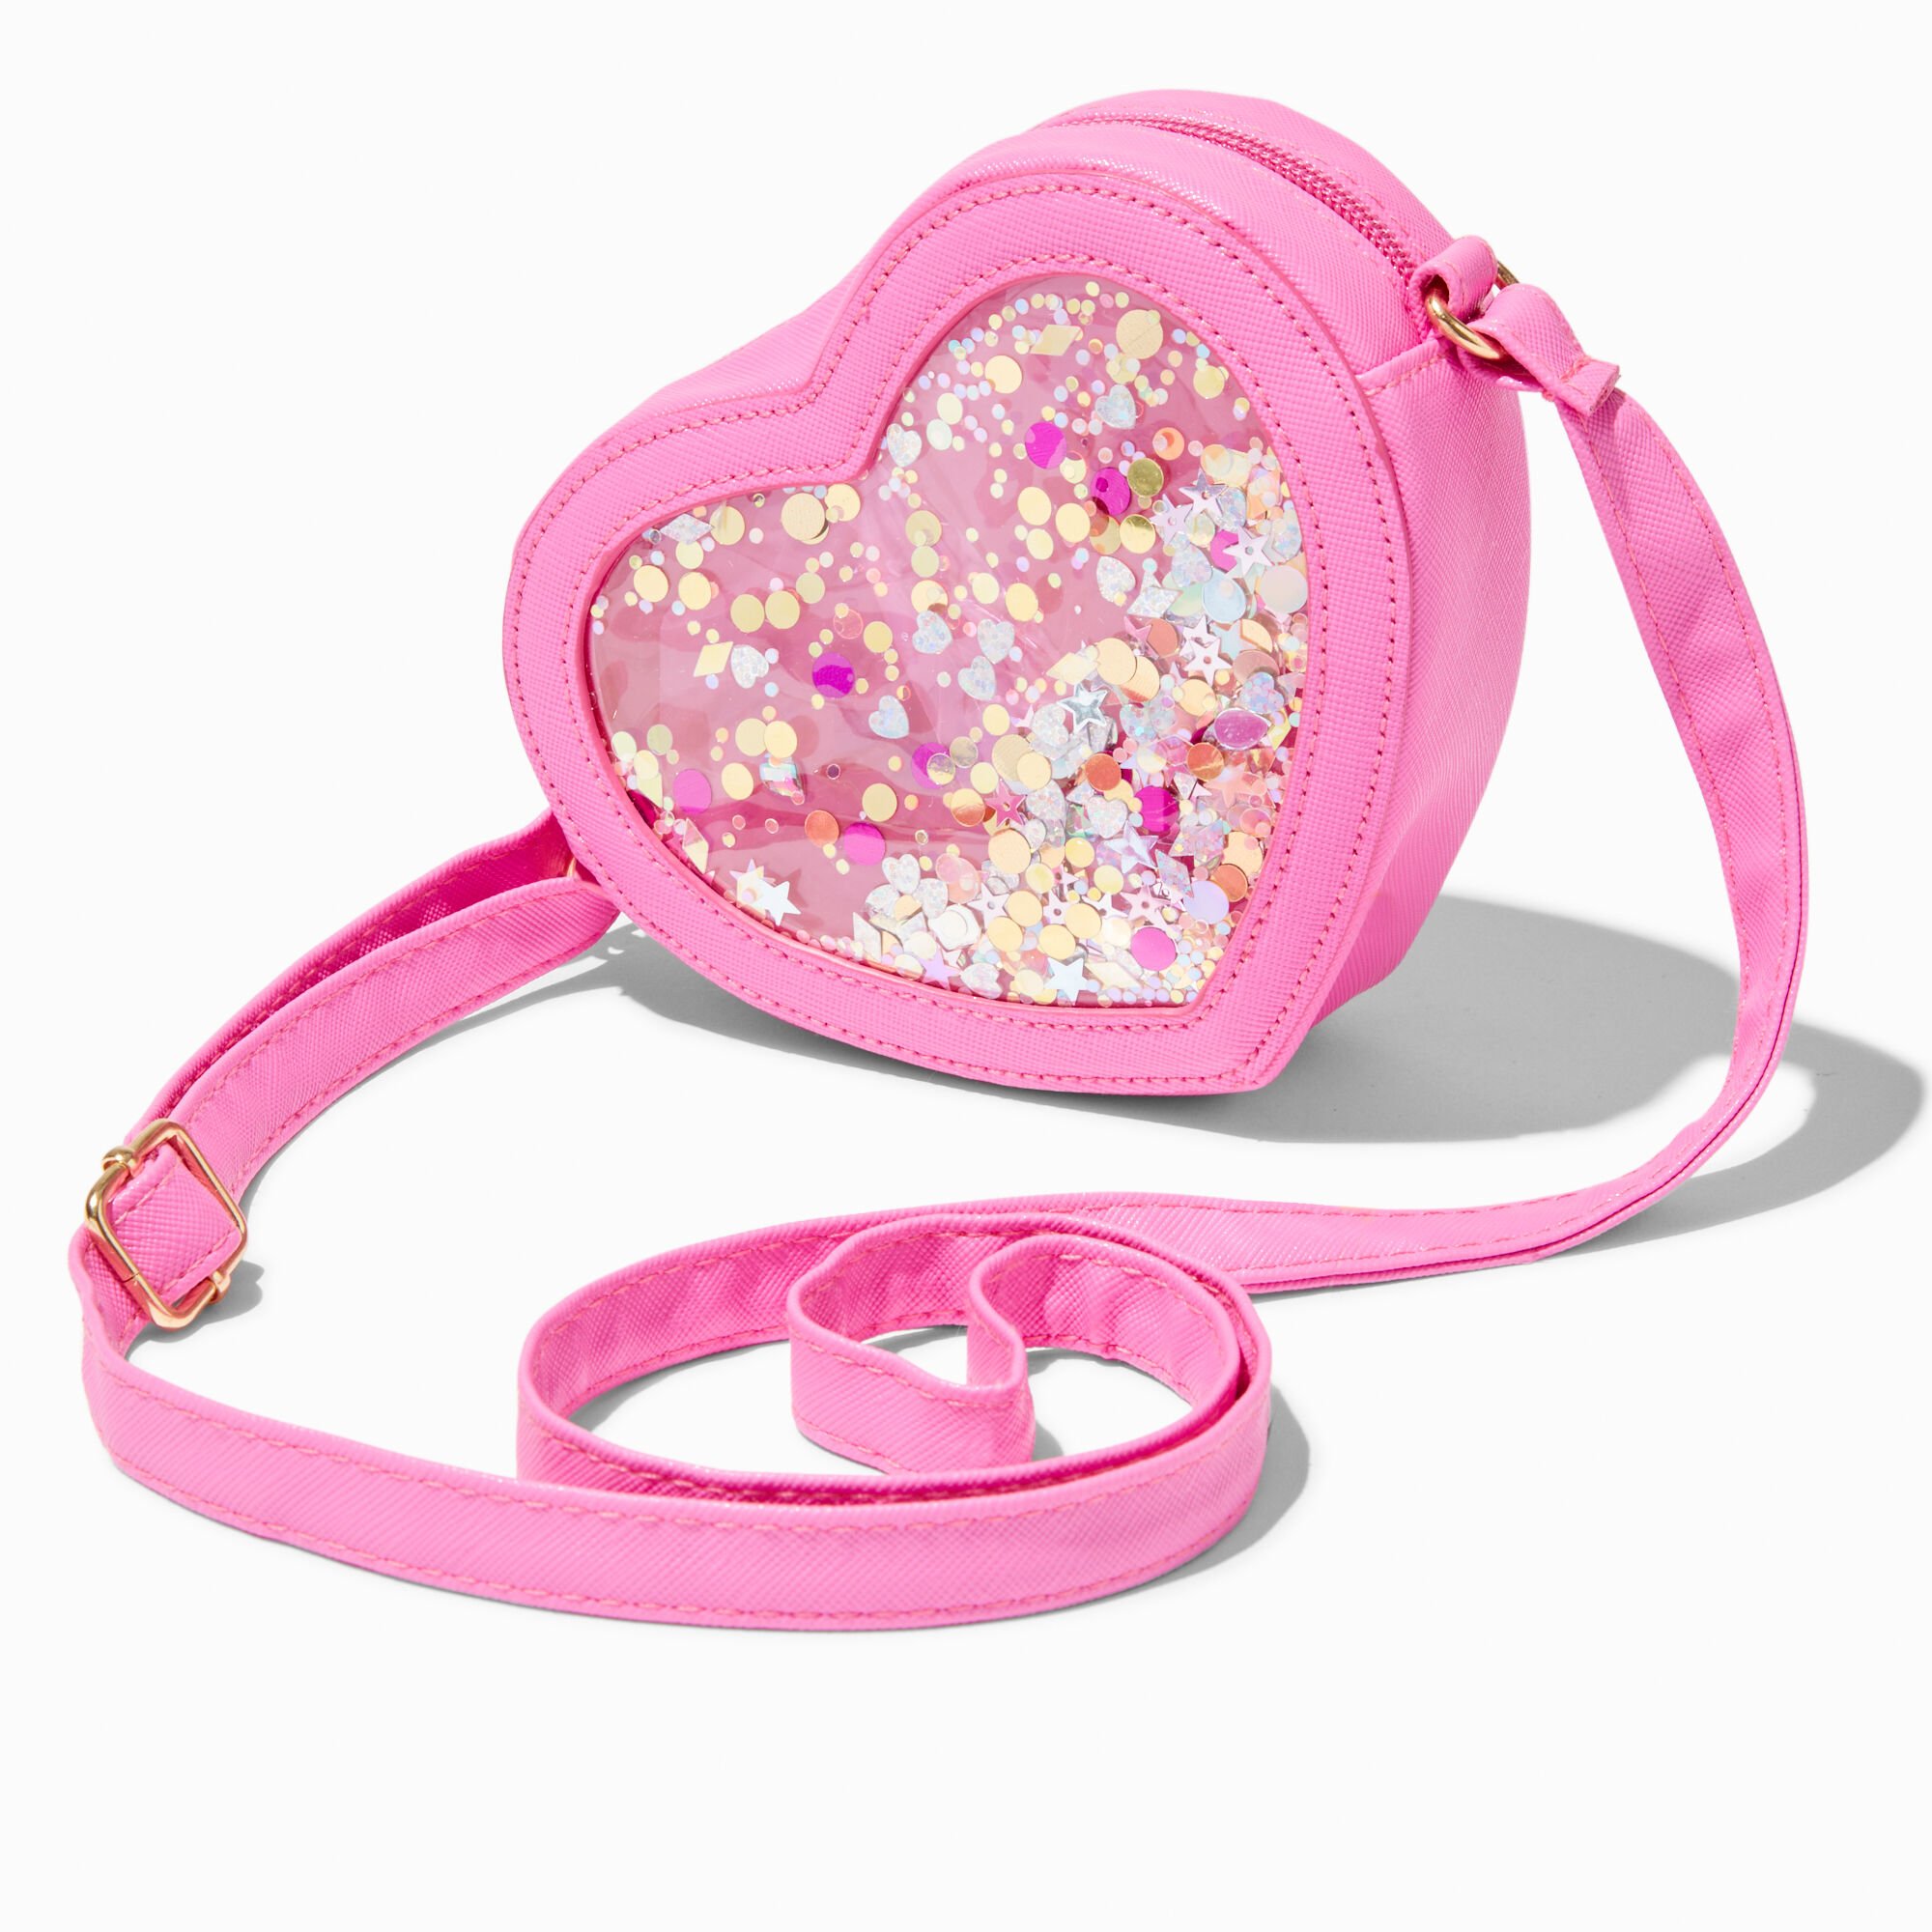 View Claires Club Shaker Transparent Heart Crossbody Bag Pink information